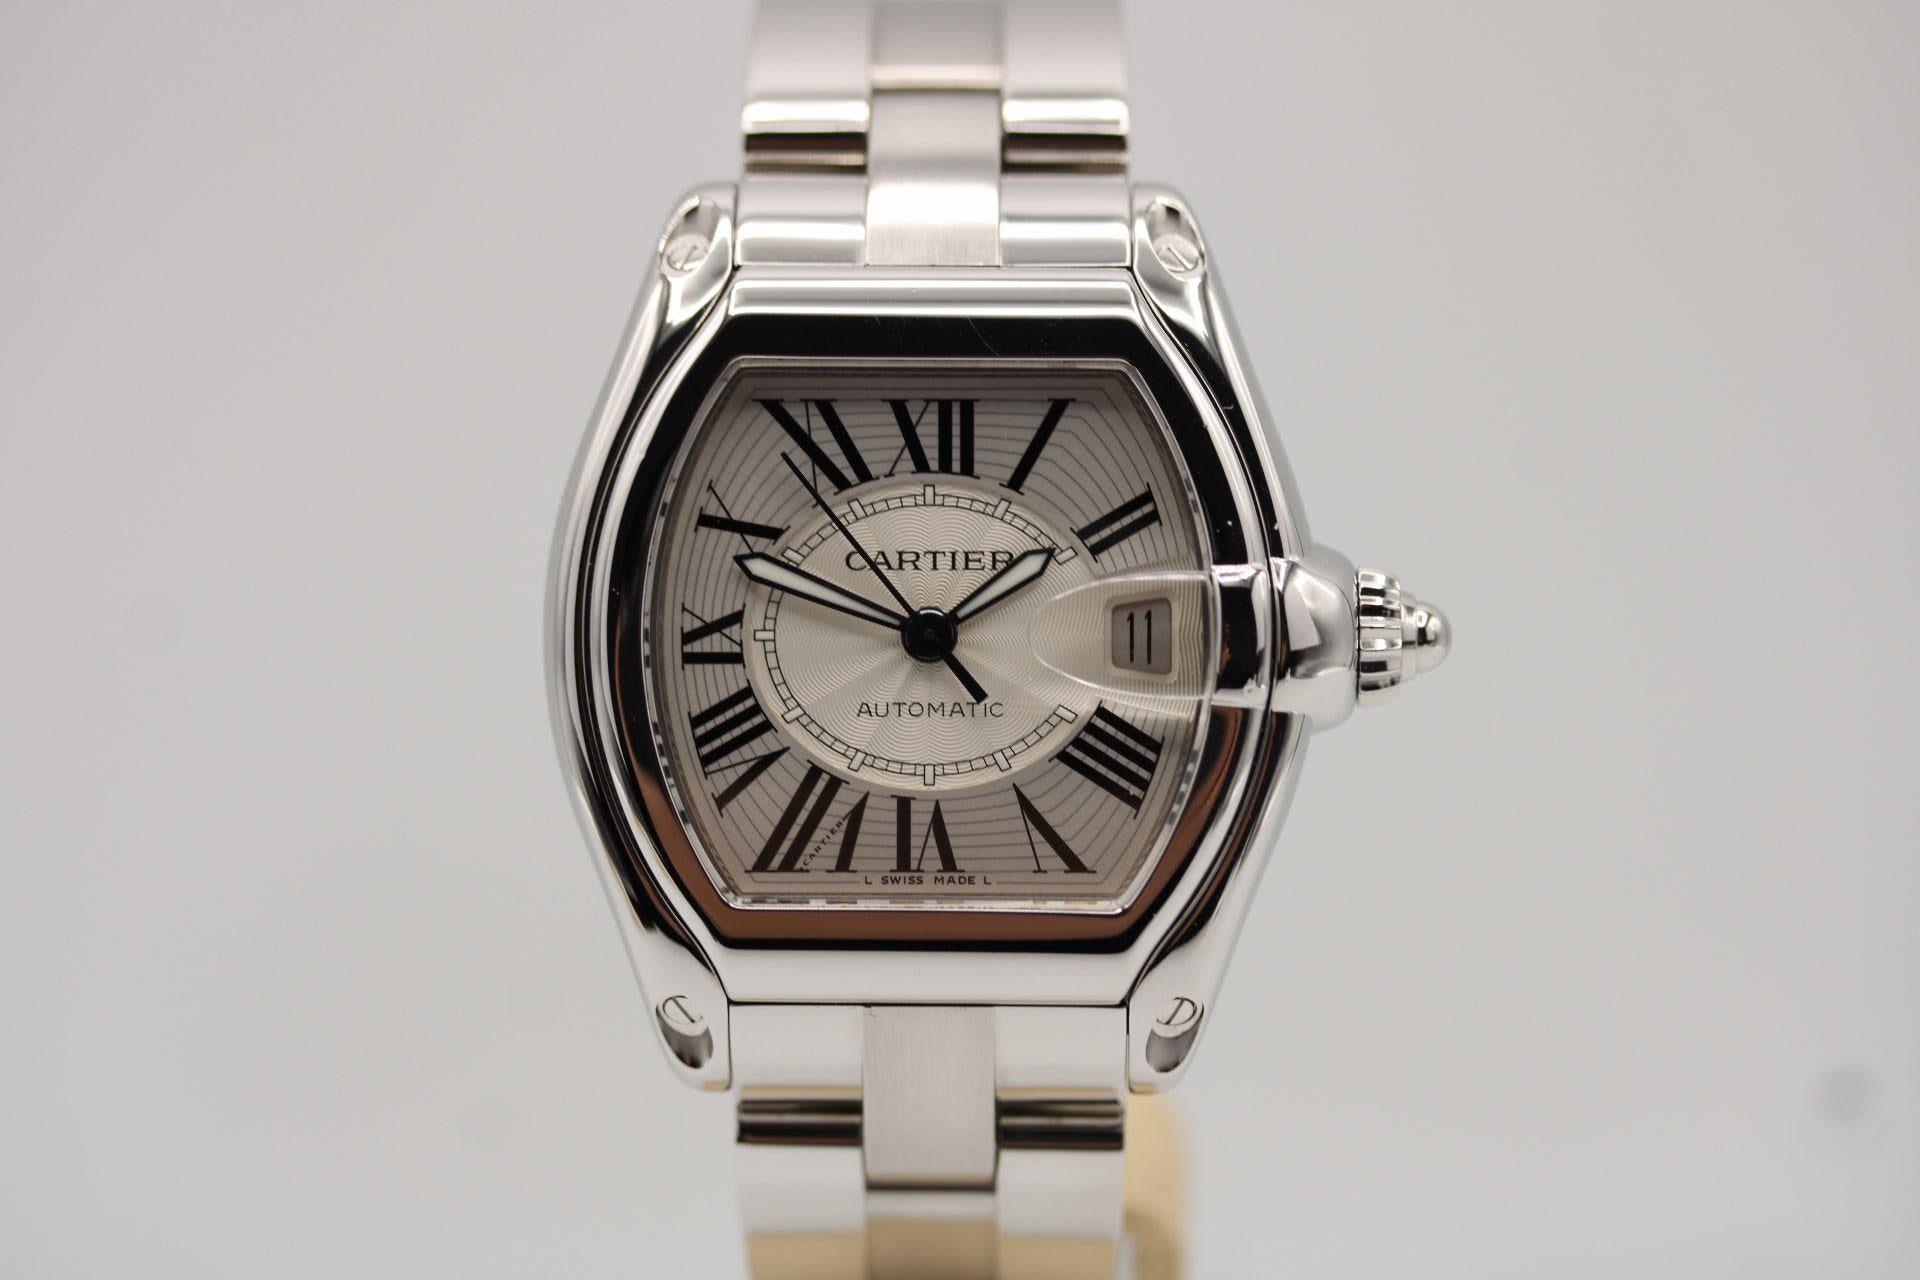 Watch: Cartier Roadster 2510
Stock Number: CHW5433A
Price: £2,500.00

No one really knows why Cartier decided to discontinue the ever popular Roadster model! Produced for just a few years, these watches are well made and robust watches that are